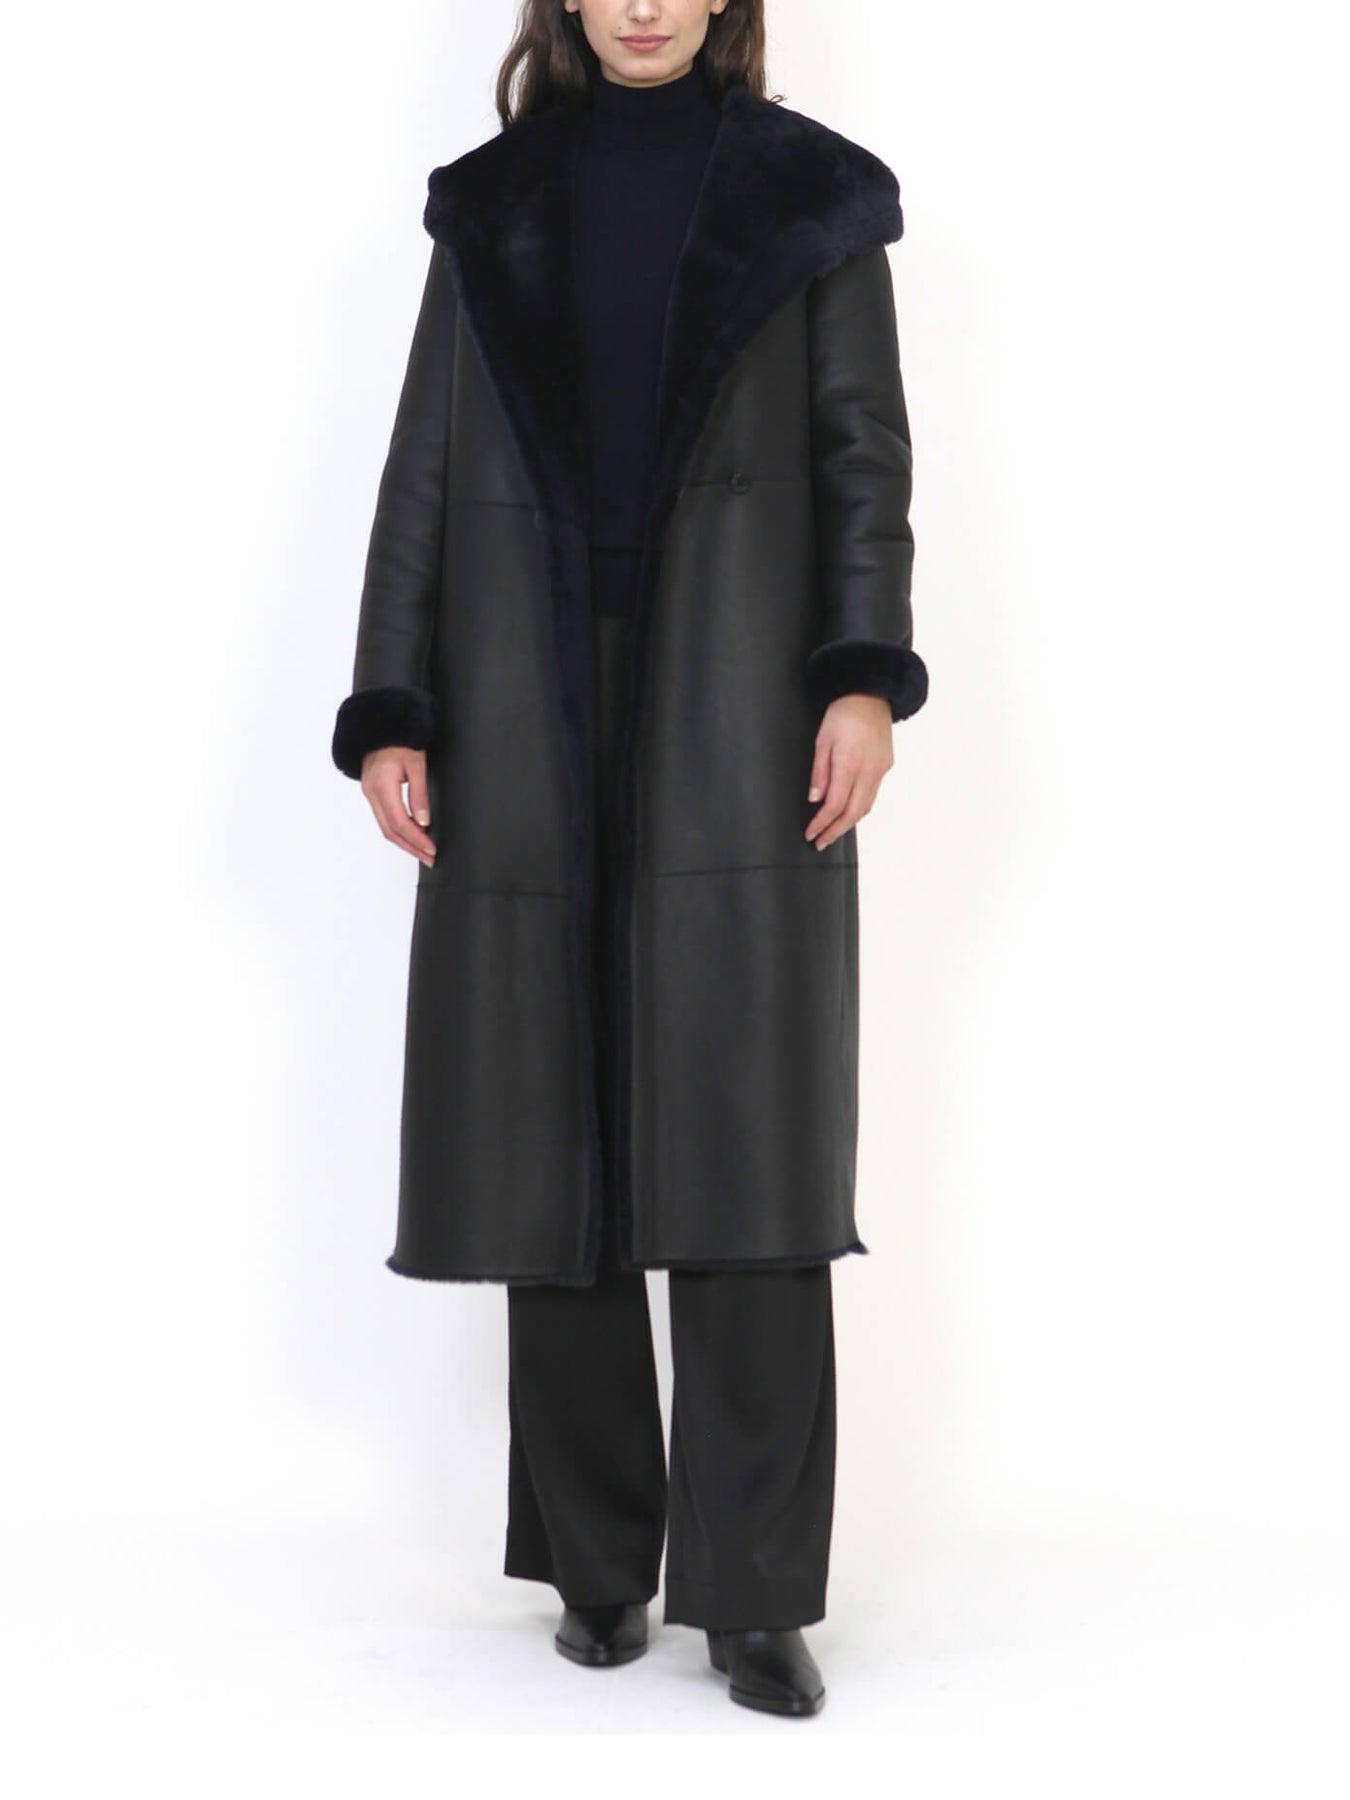 Isabel Women's long shearling coat with hood | TuscanTailor